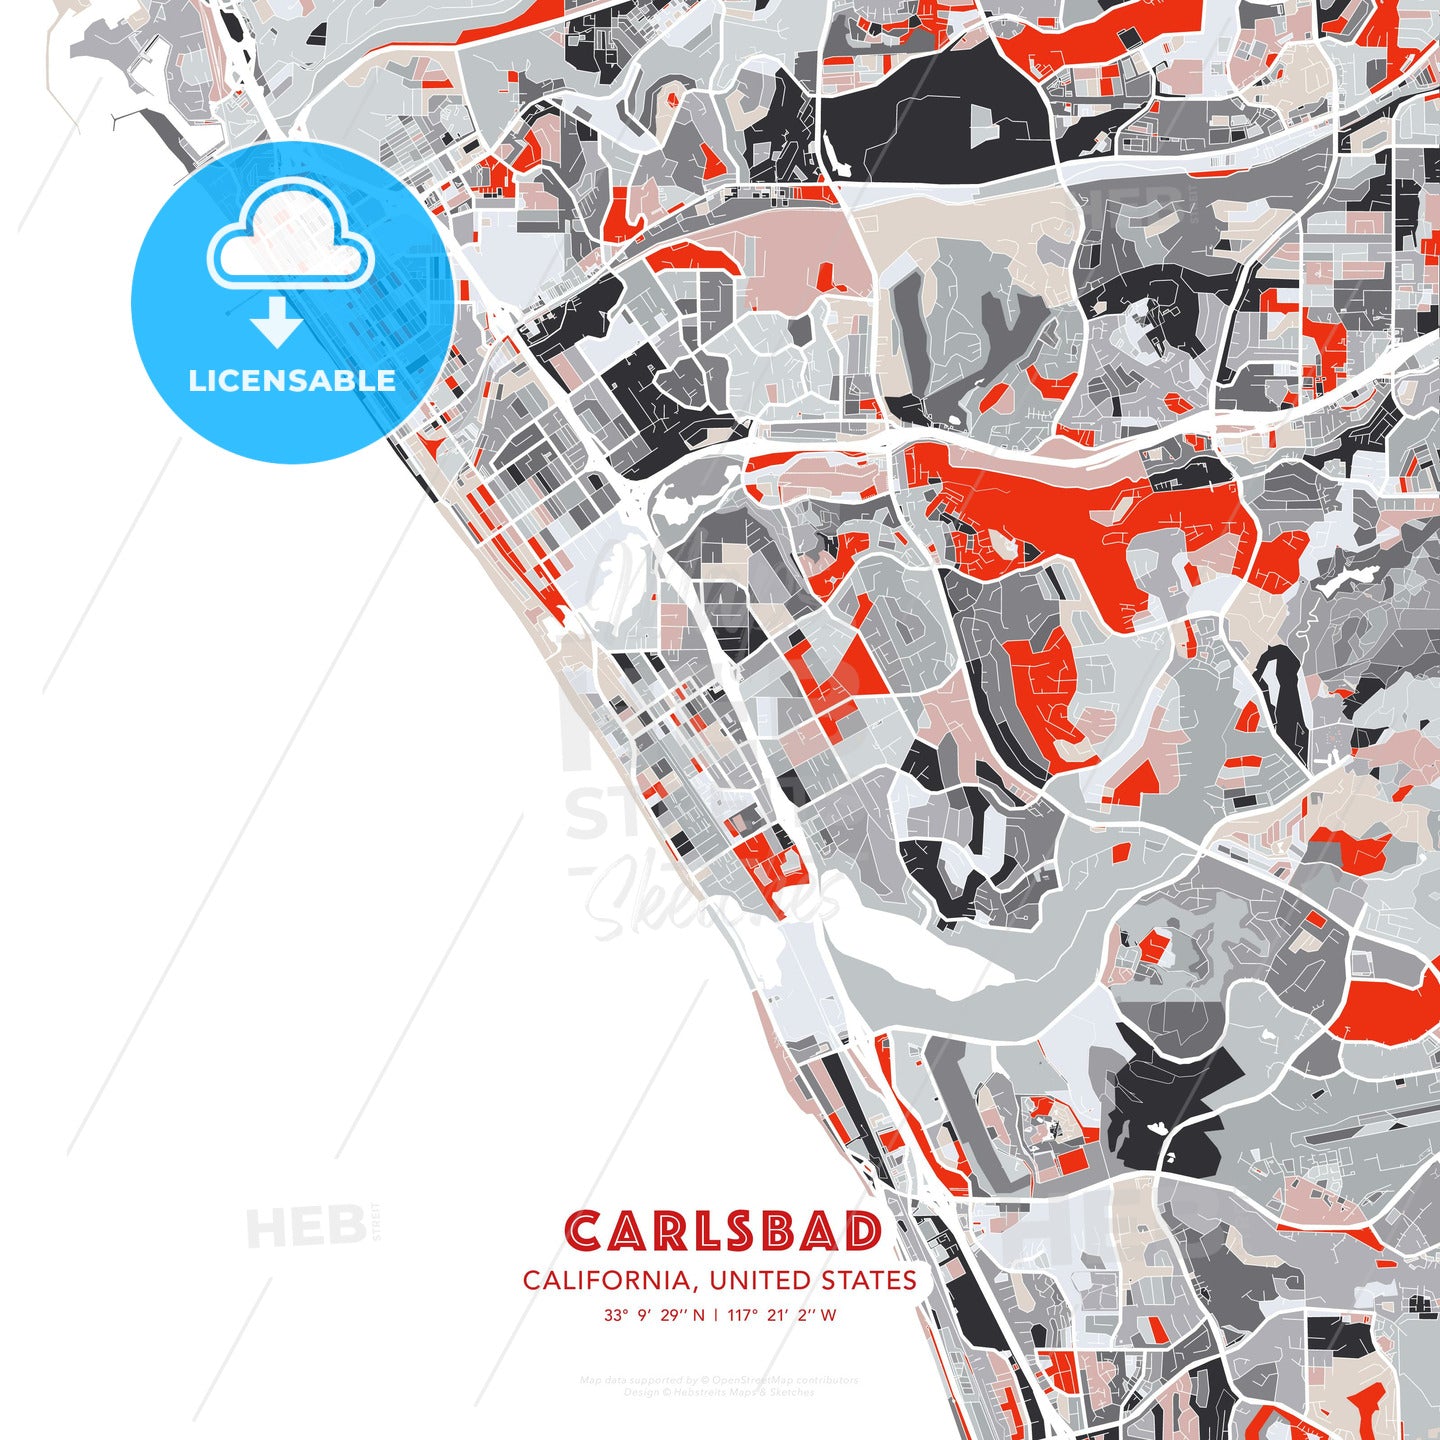 Carlsbad, California, United States, modern map - HEBSTREITS Sketches